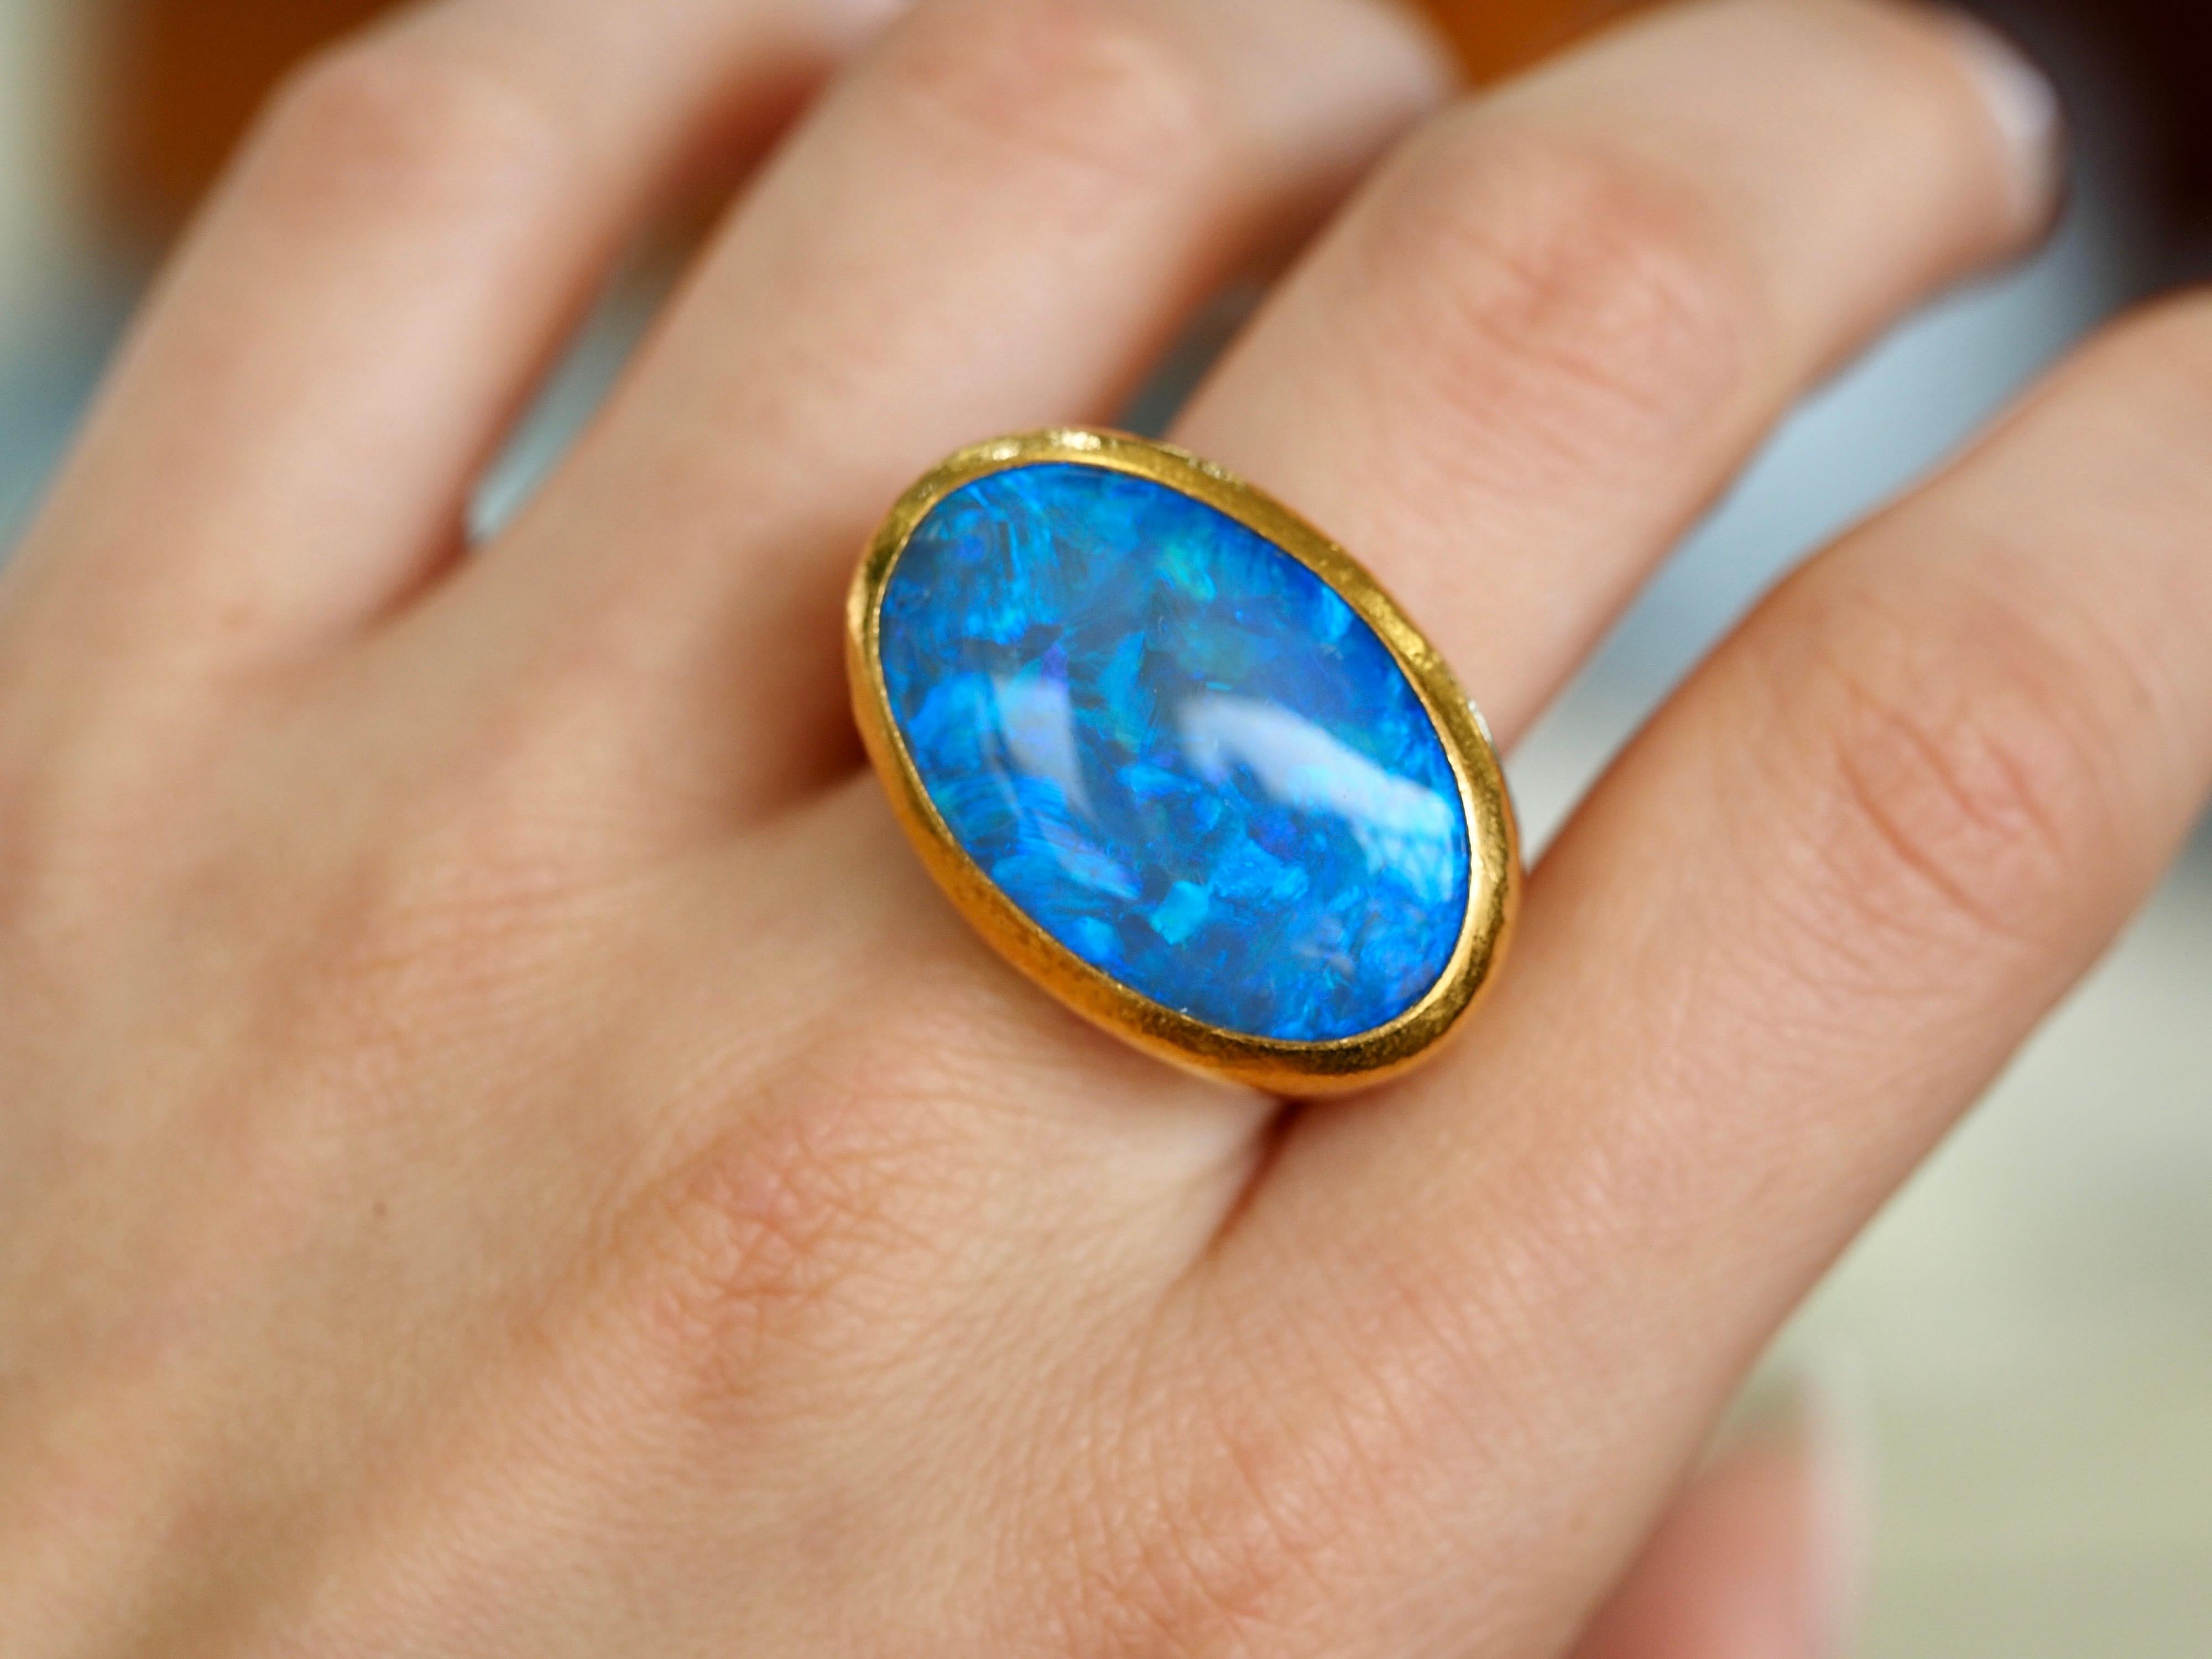 Gurhan one-of-a-kind 24-karat Australian opal ring is absolutely breath taking. The signature 24-karat yellow gold has a hammered finish that catches the light at all angles. The bezel set oval opal center is a blend of blues, purples and greens in